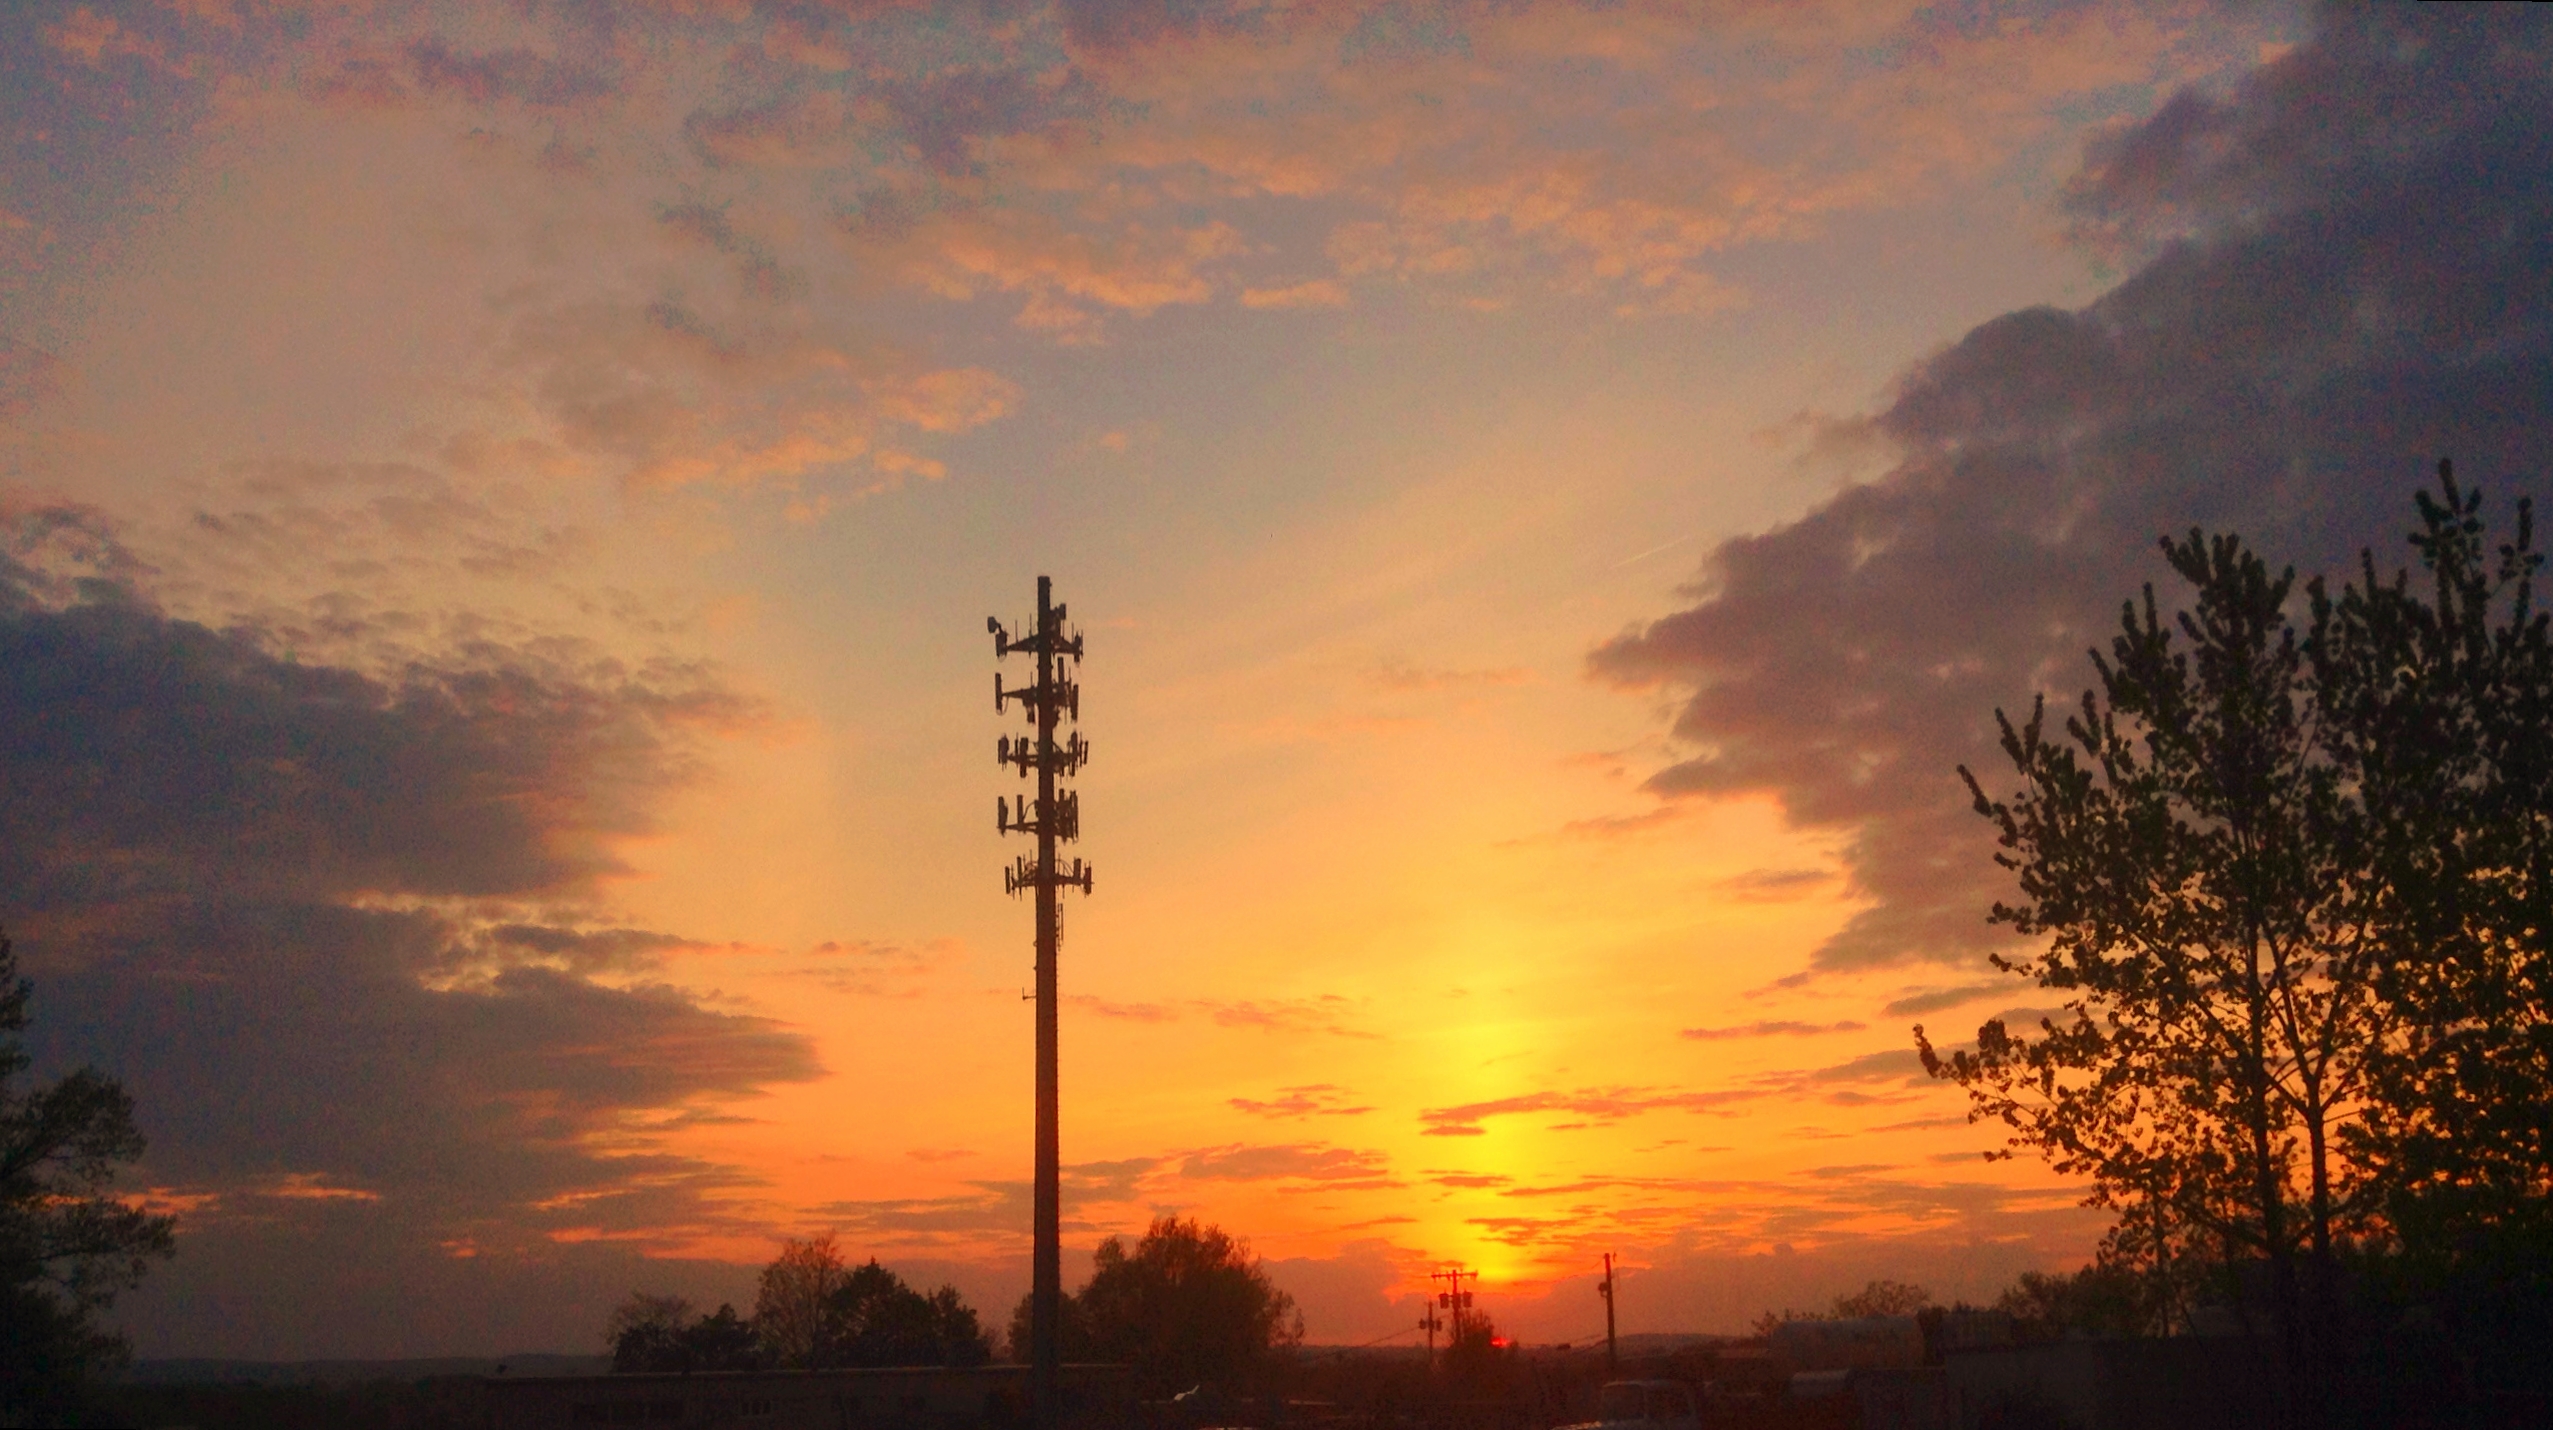 a cell phone tower is silhouetted by the sunset